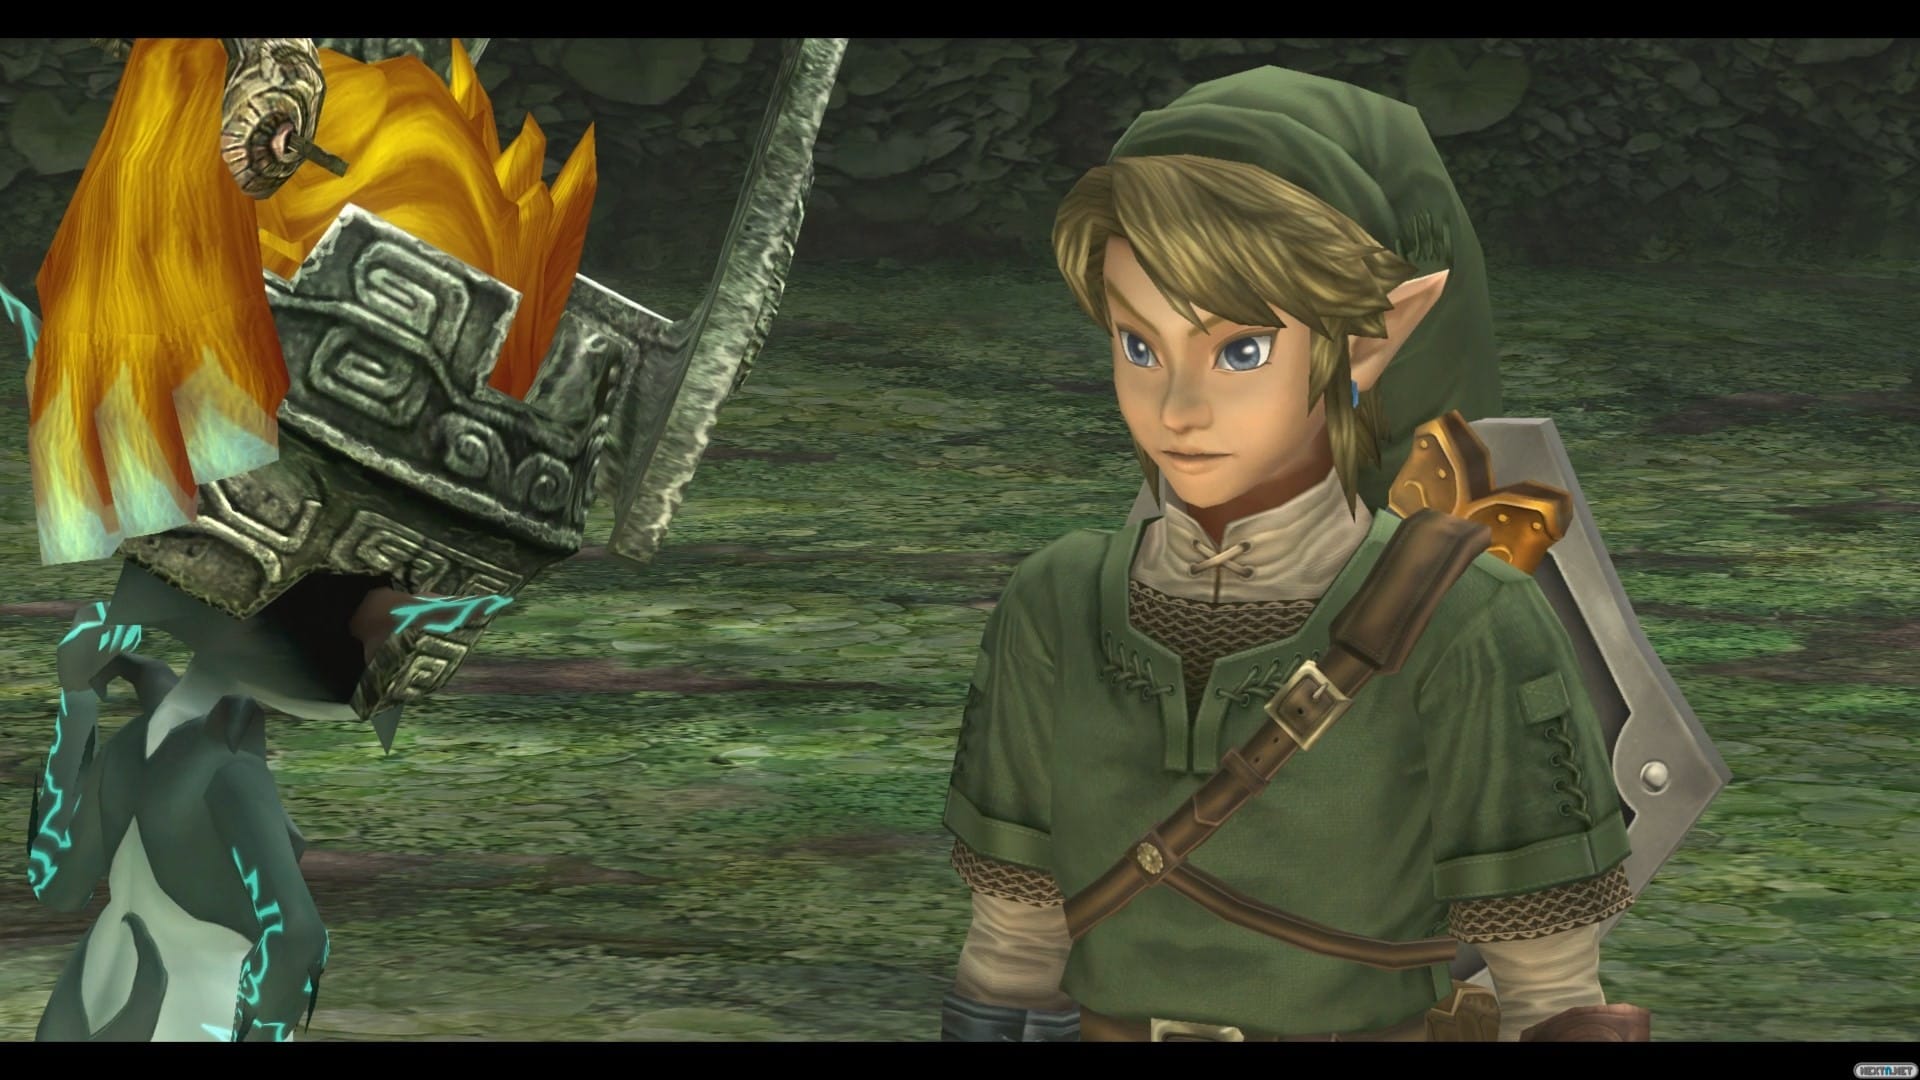 6. "Link with Blue Hair" by Twilight Princess - wide 3